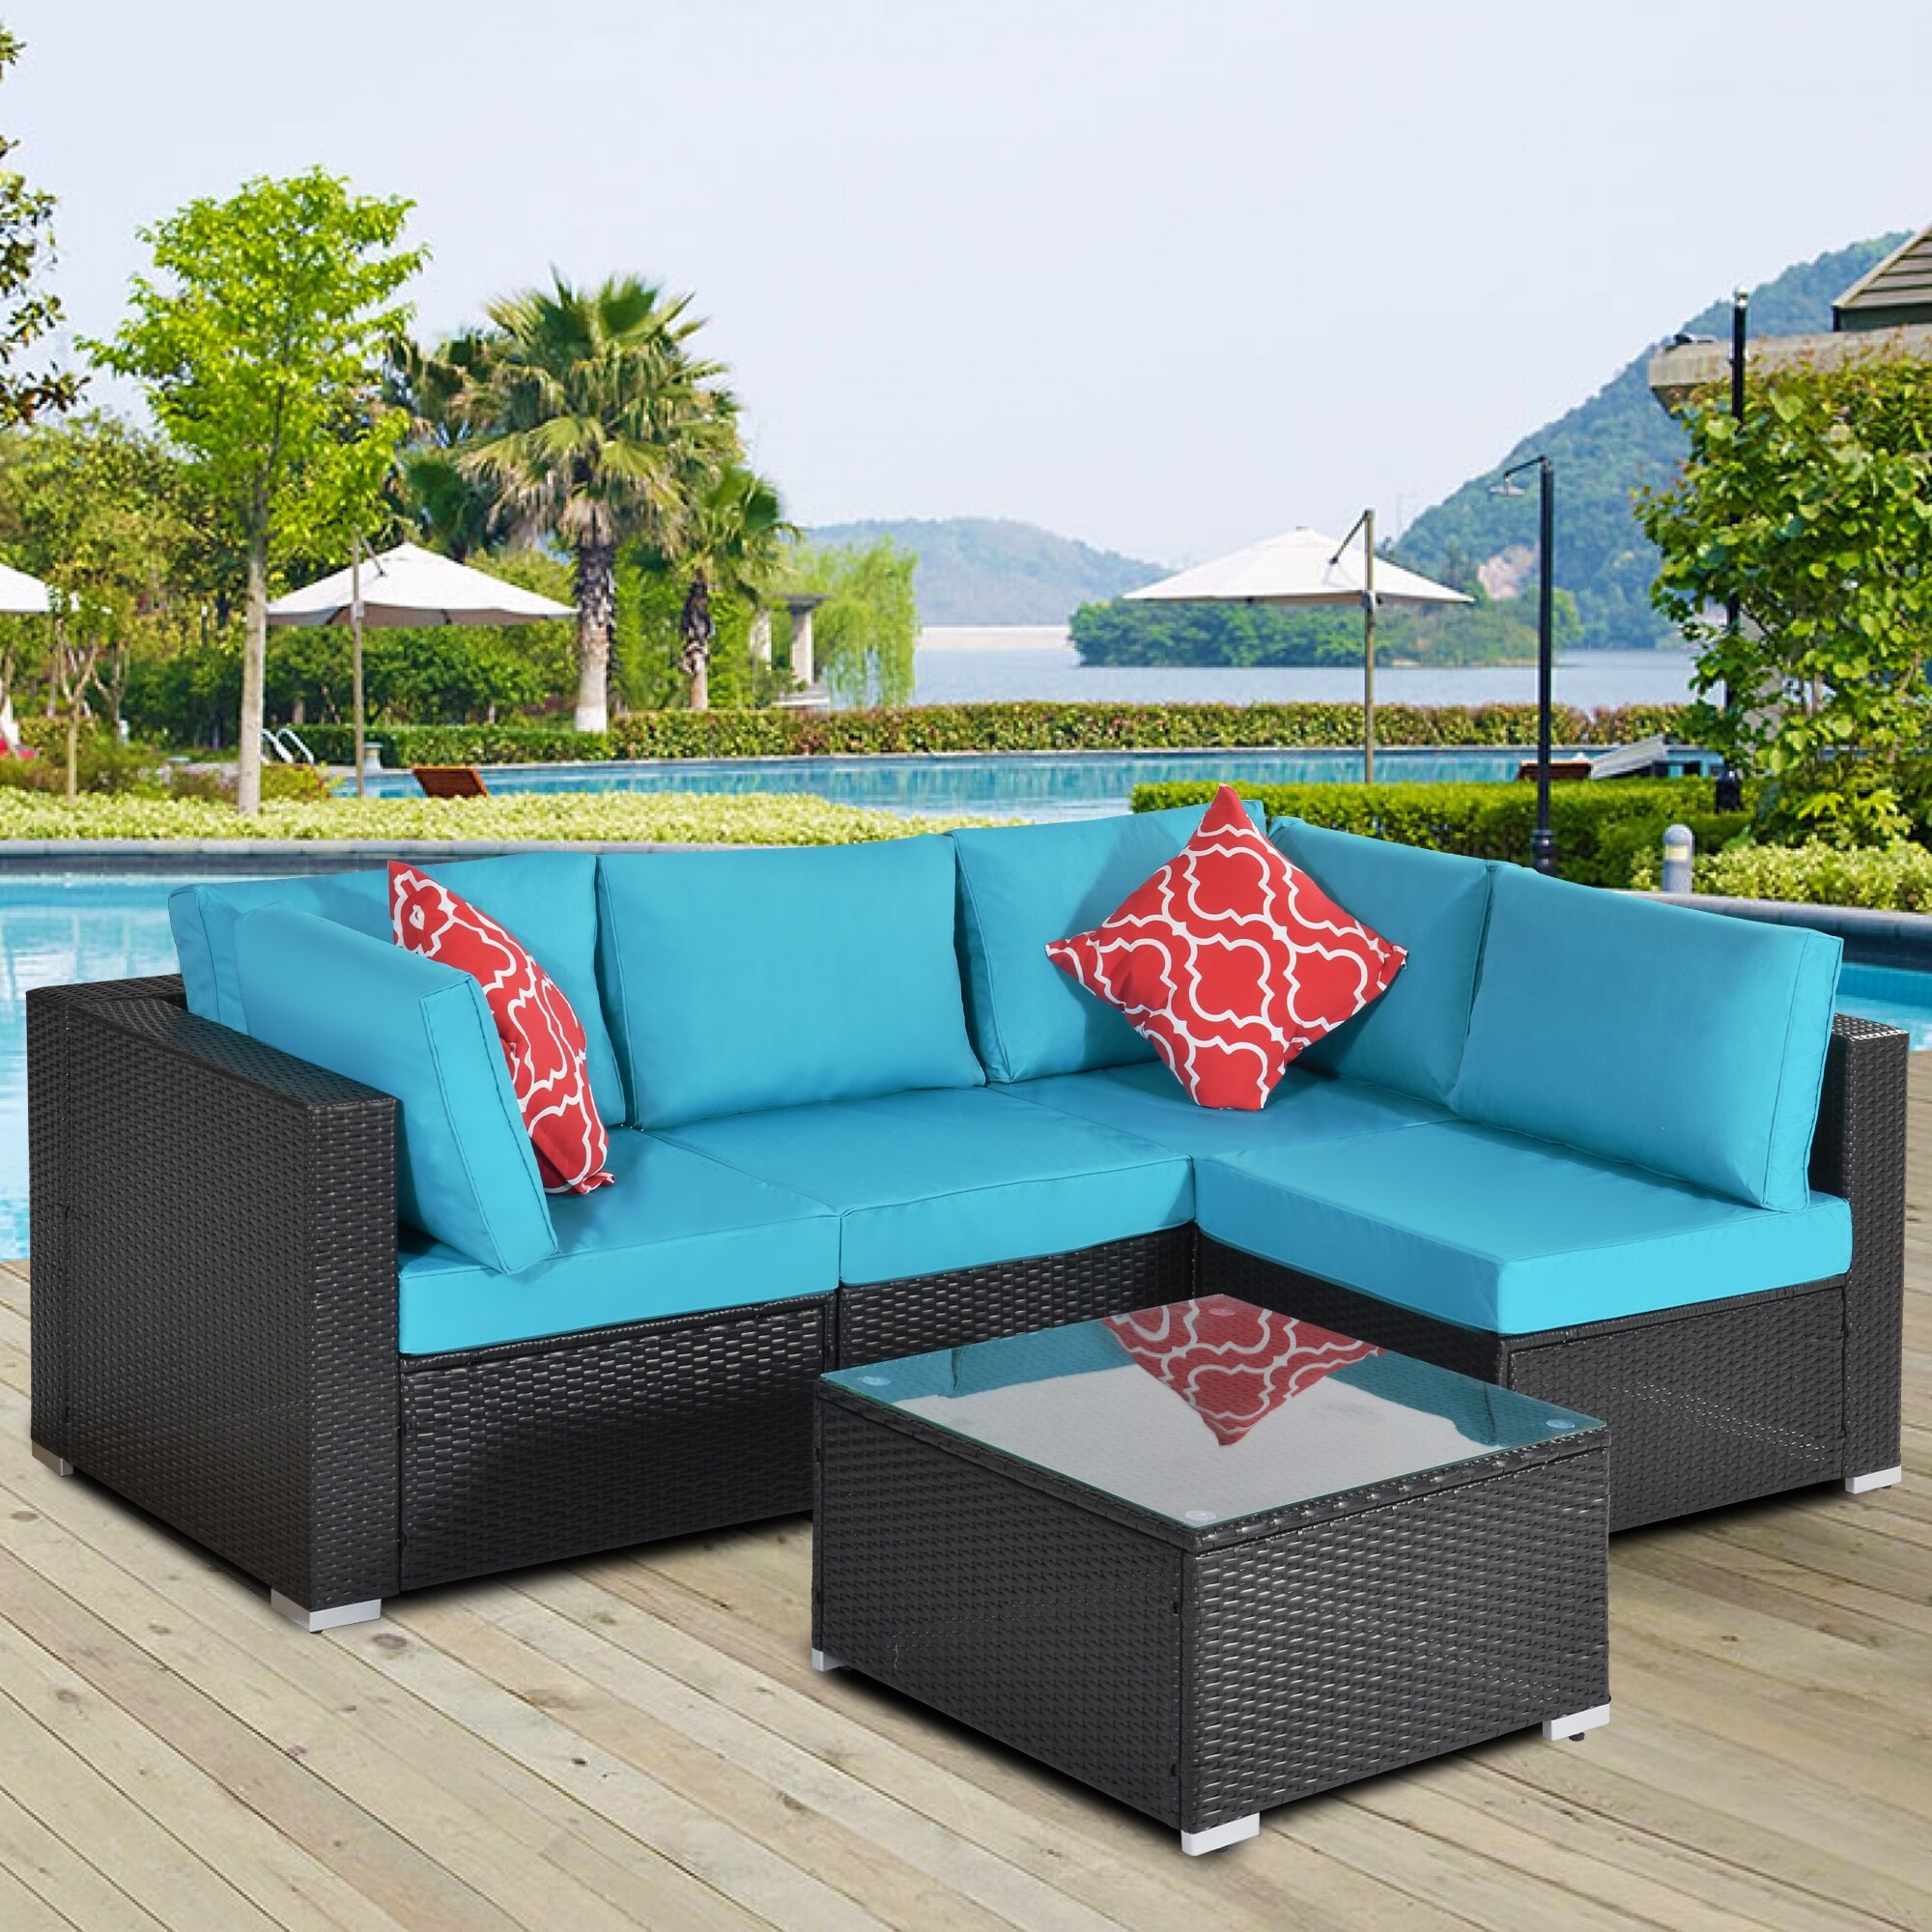 7-pieces Outdoor Patio Furniture Sets For 4-5  Garden Sofa Set With 2 Single Sofa Chair  2 Single Corner Chair and 1 Coffee Table.